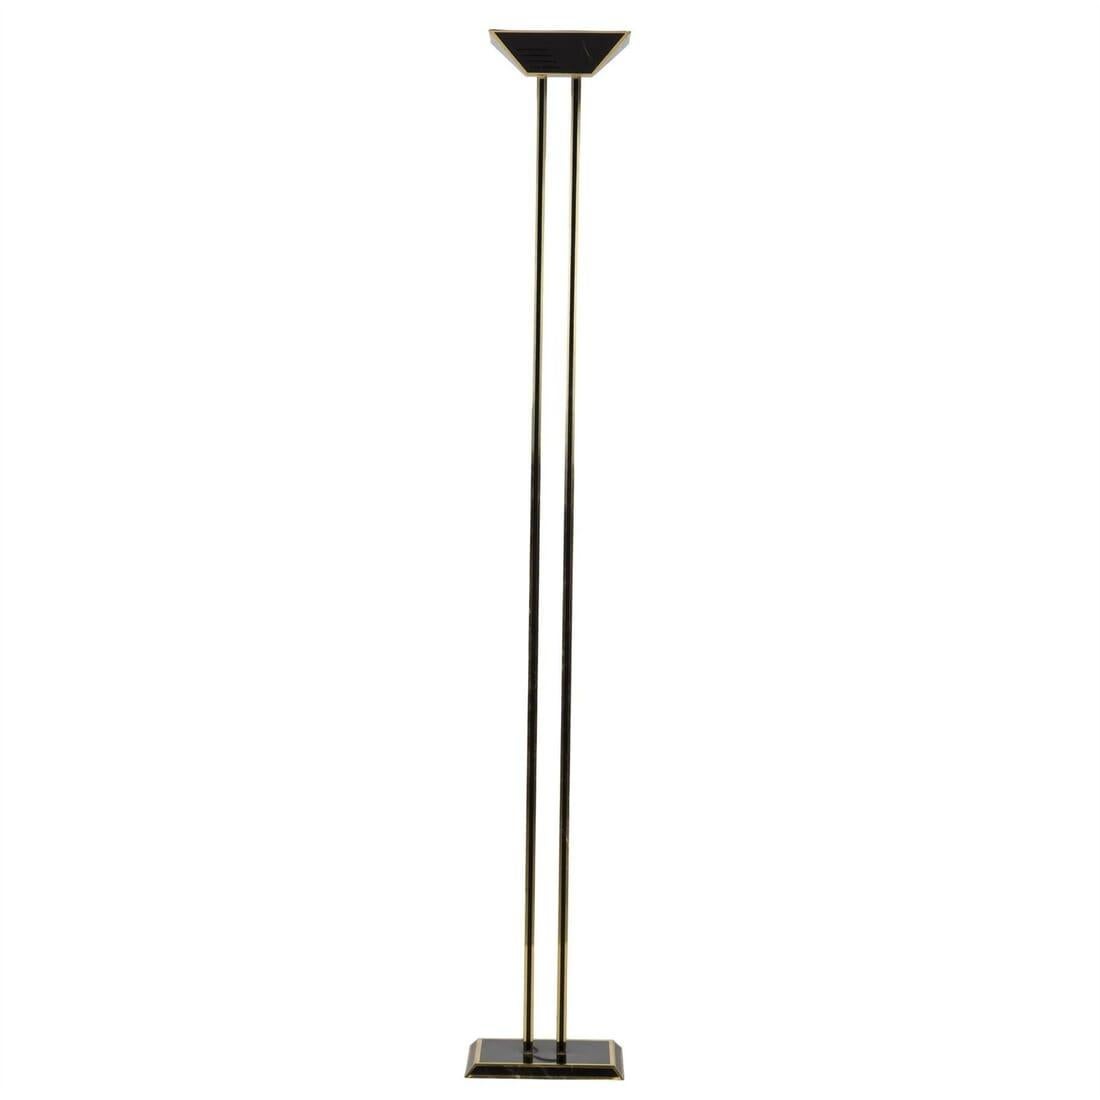 1970s French black and brass uplighter in the manner of Maison Jansen.